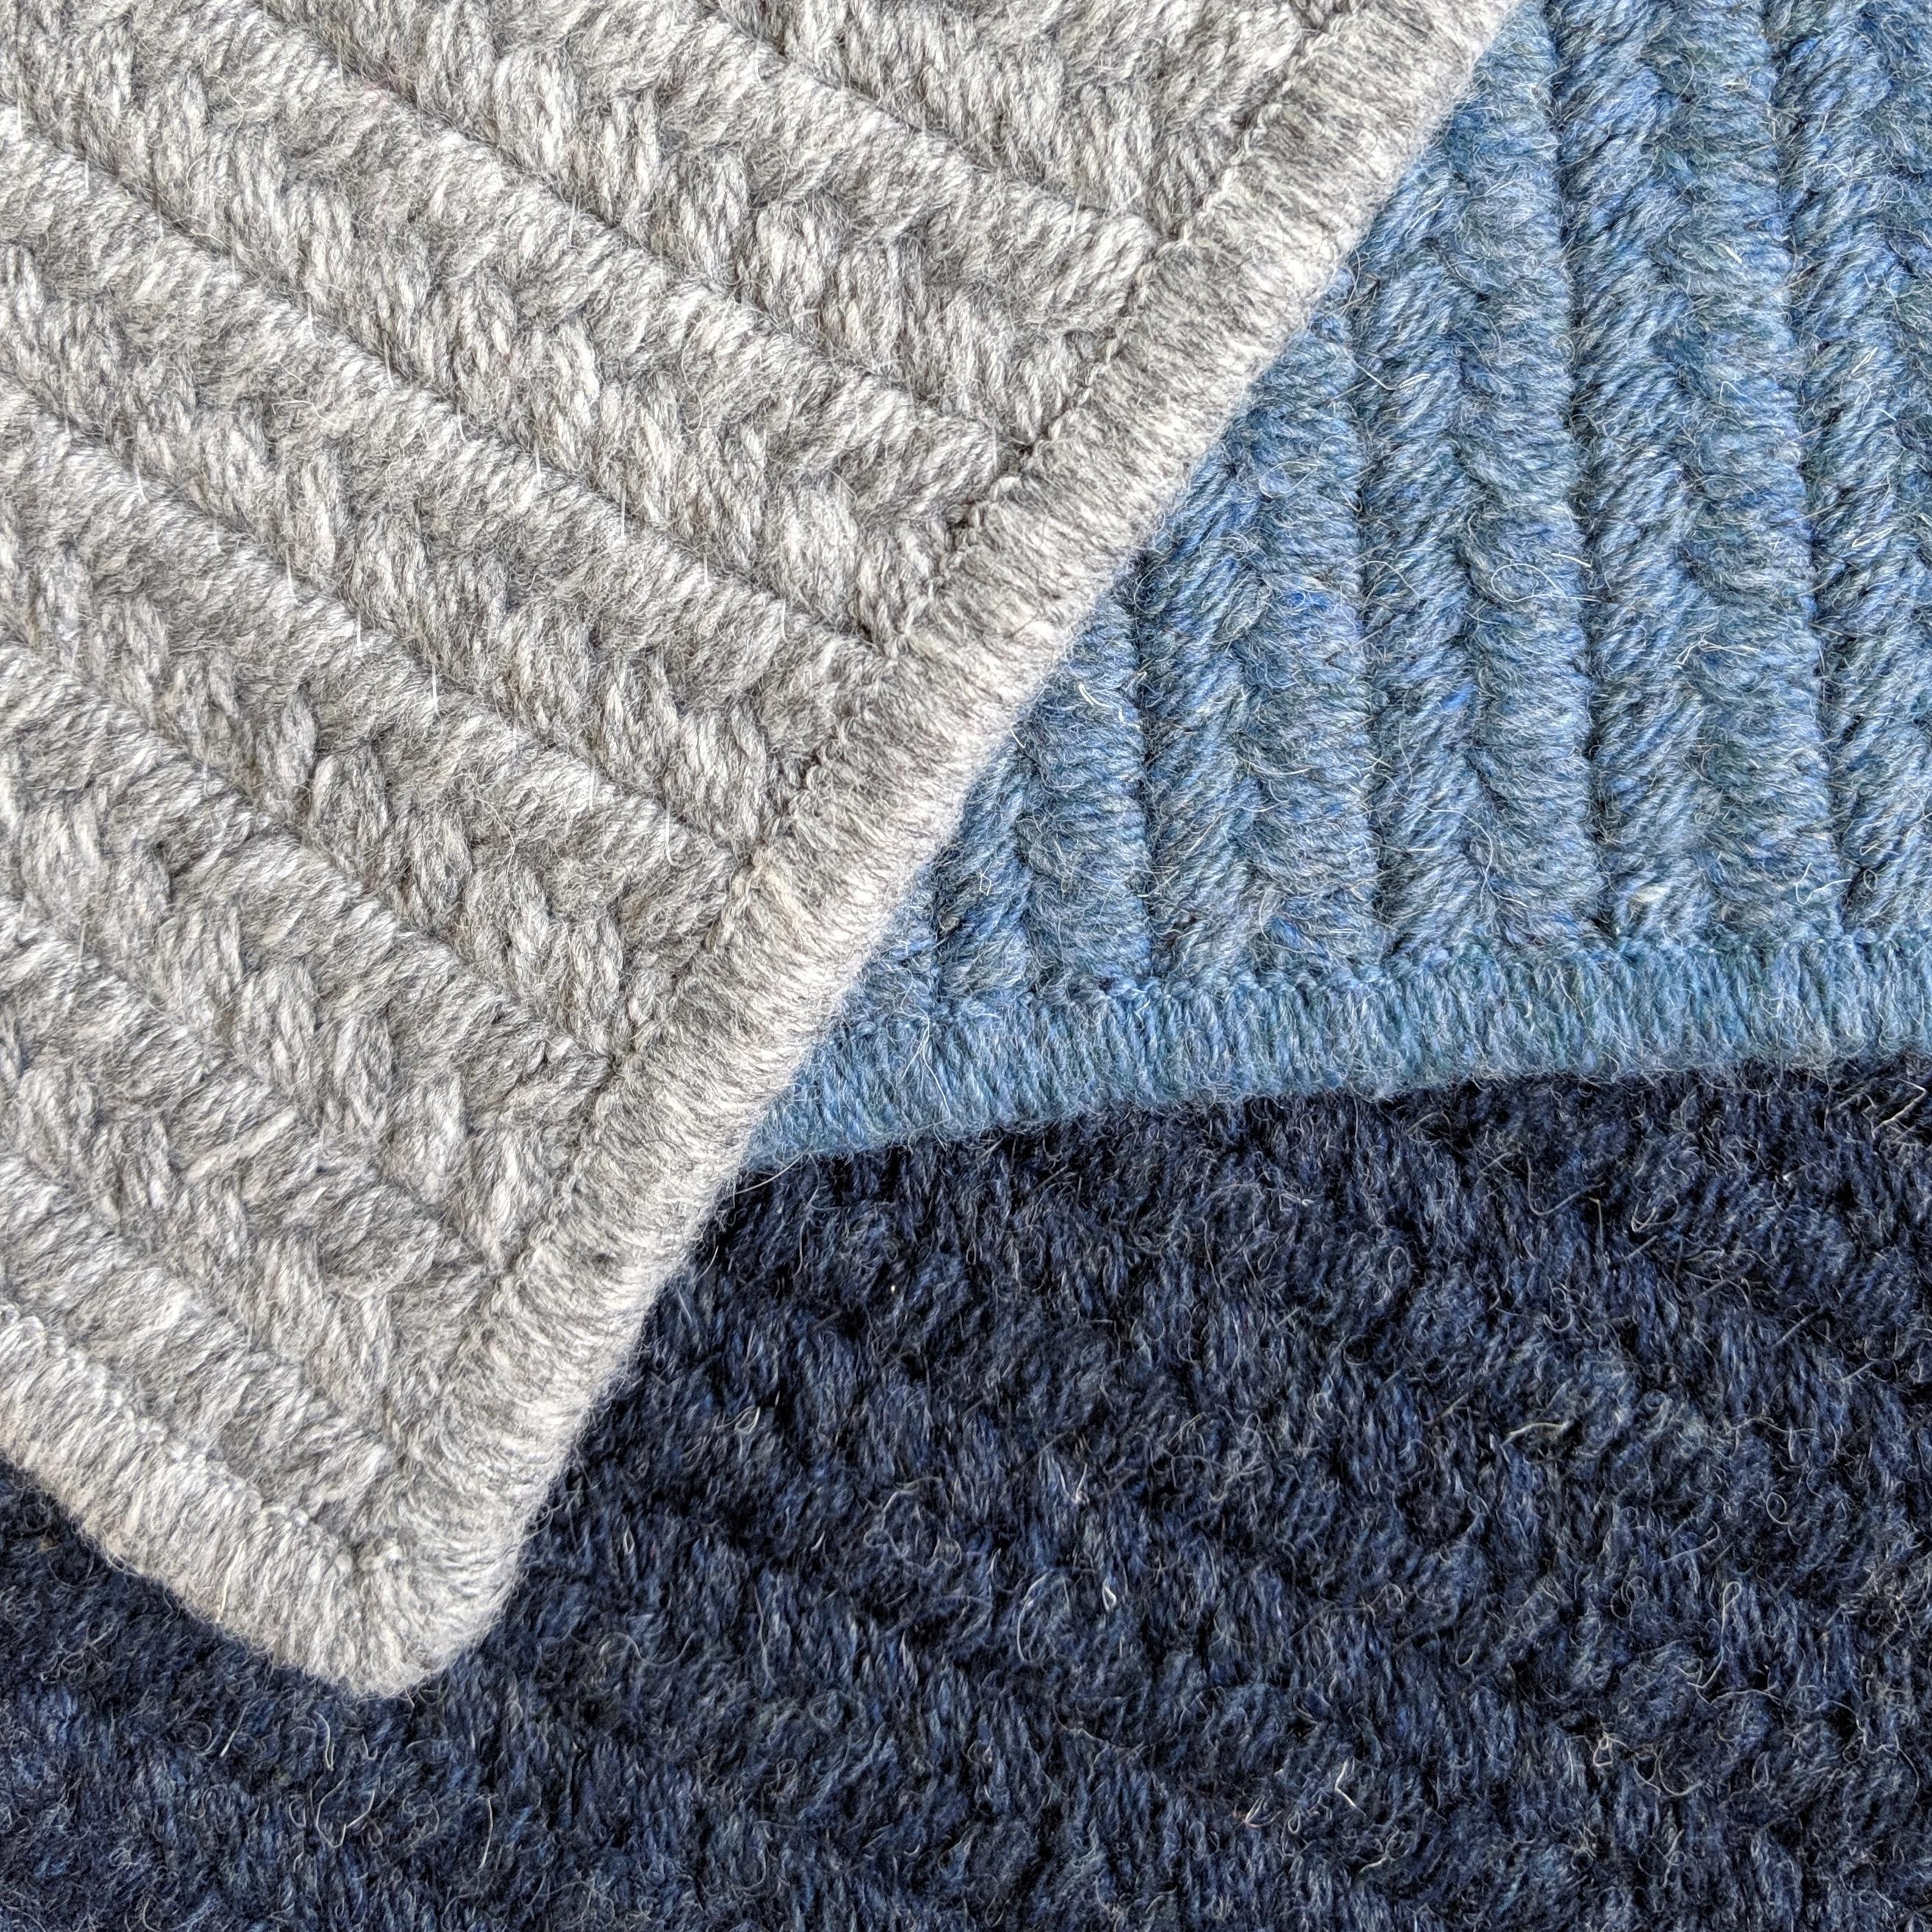 This listing is for a 6 x 8 rug in the colors shown in the first image plus a rug pad for use on hard surfaces.

We offer a number of different colors. We can mix colors akin to the rug photographed or the rug can be produced out of a single color.